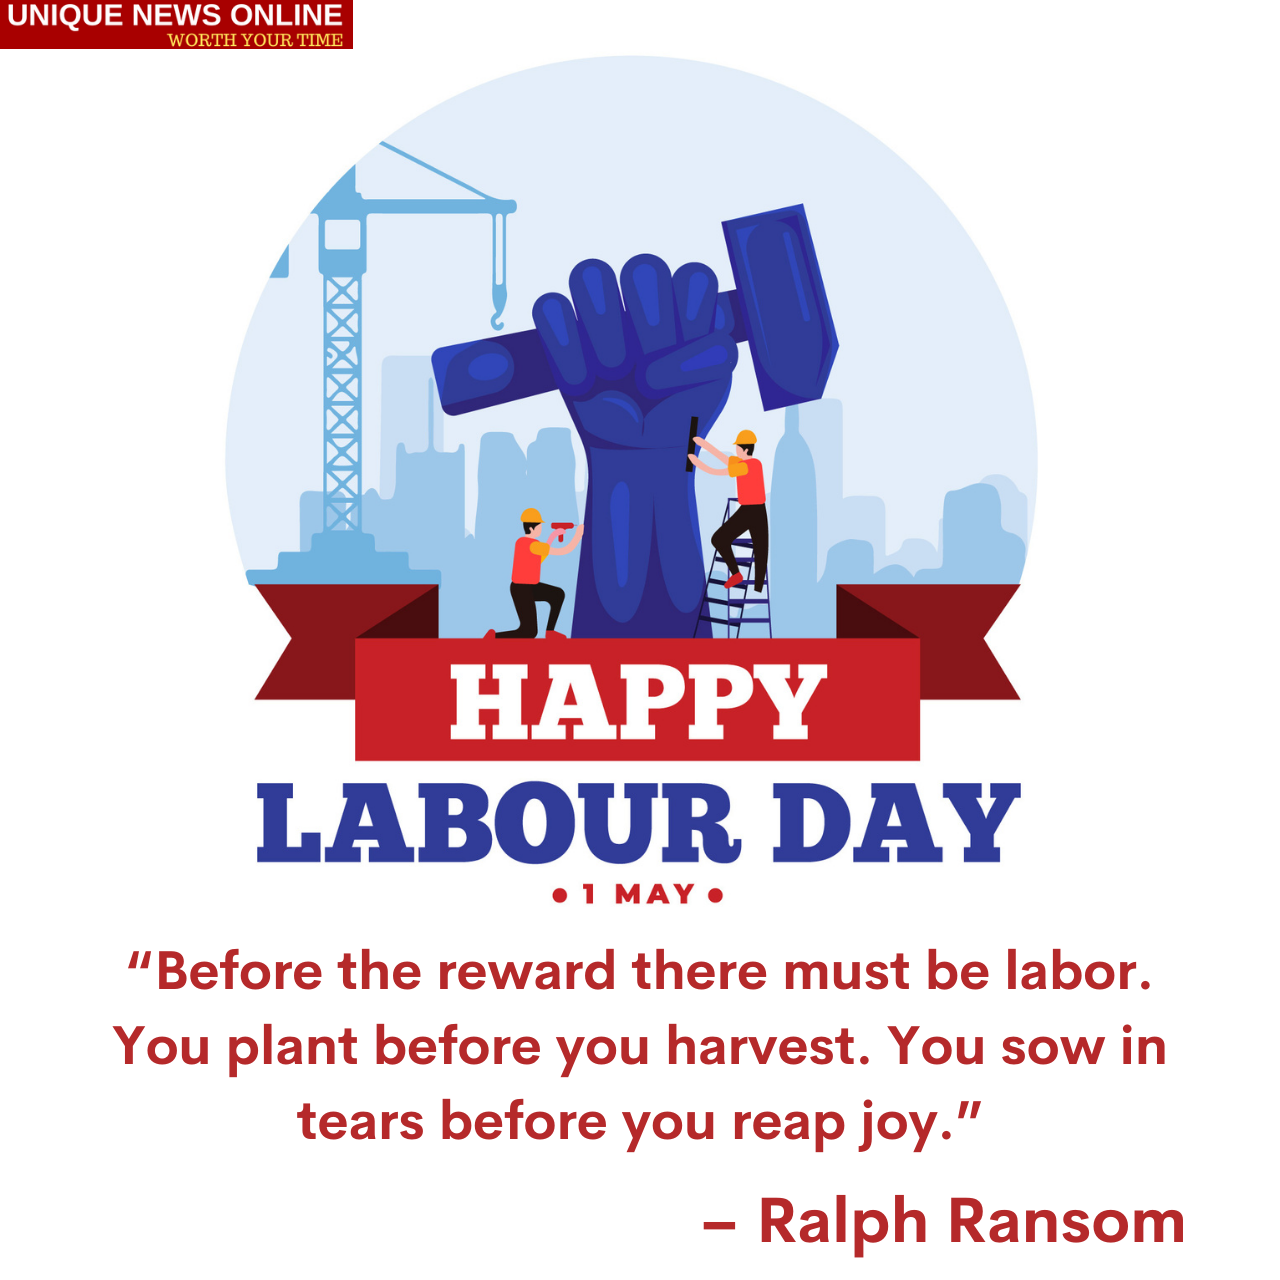 Happy Labor Day 2021 Quotes, Wishes, Meme, Stickers, and Messages for Business